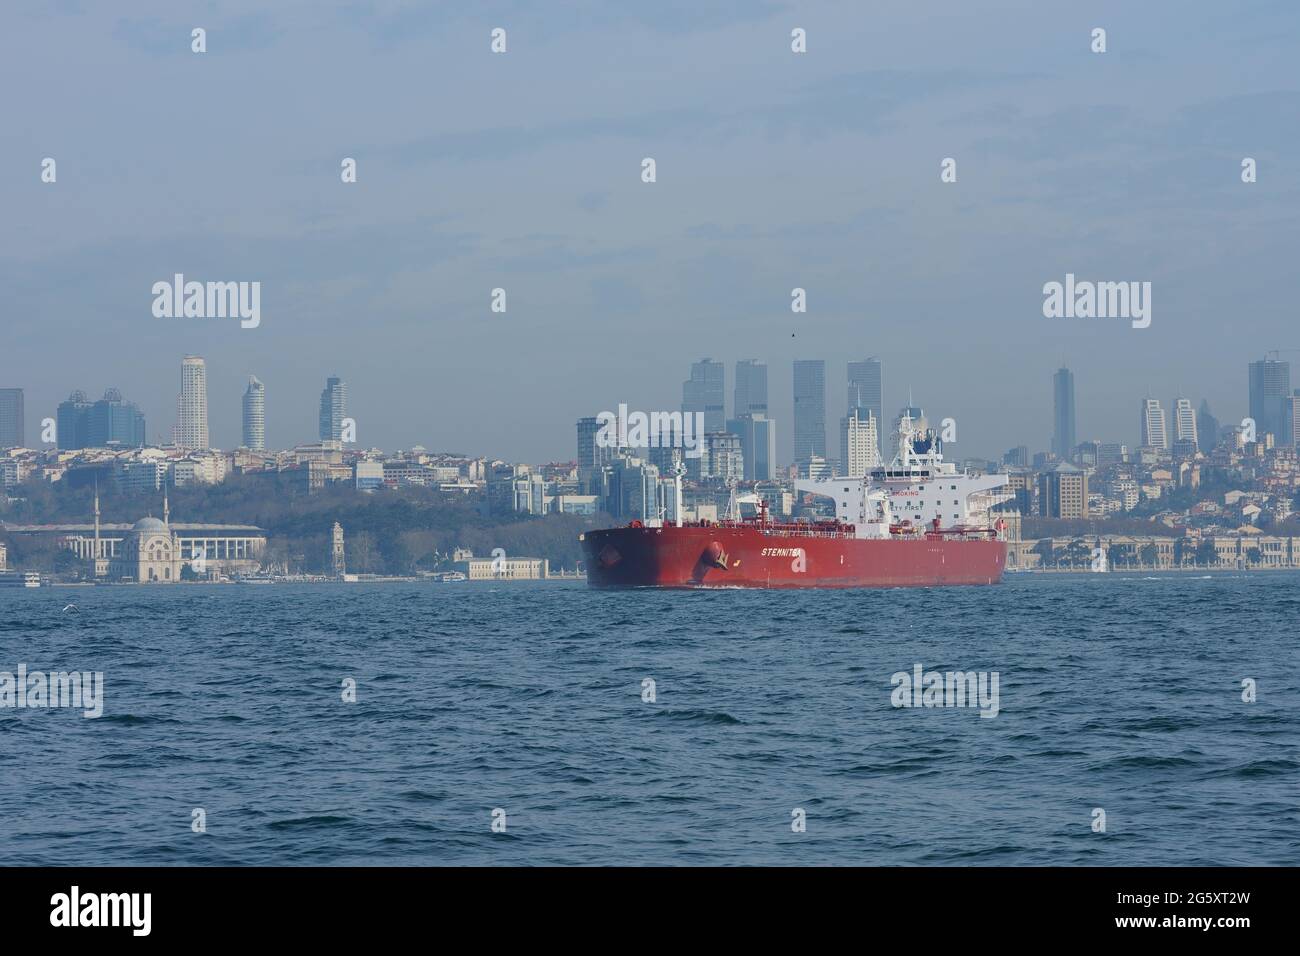 MT, Tanker vessel, ship, sailing at Bosphorus, cityscape at background Stock Photo